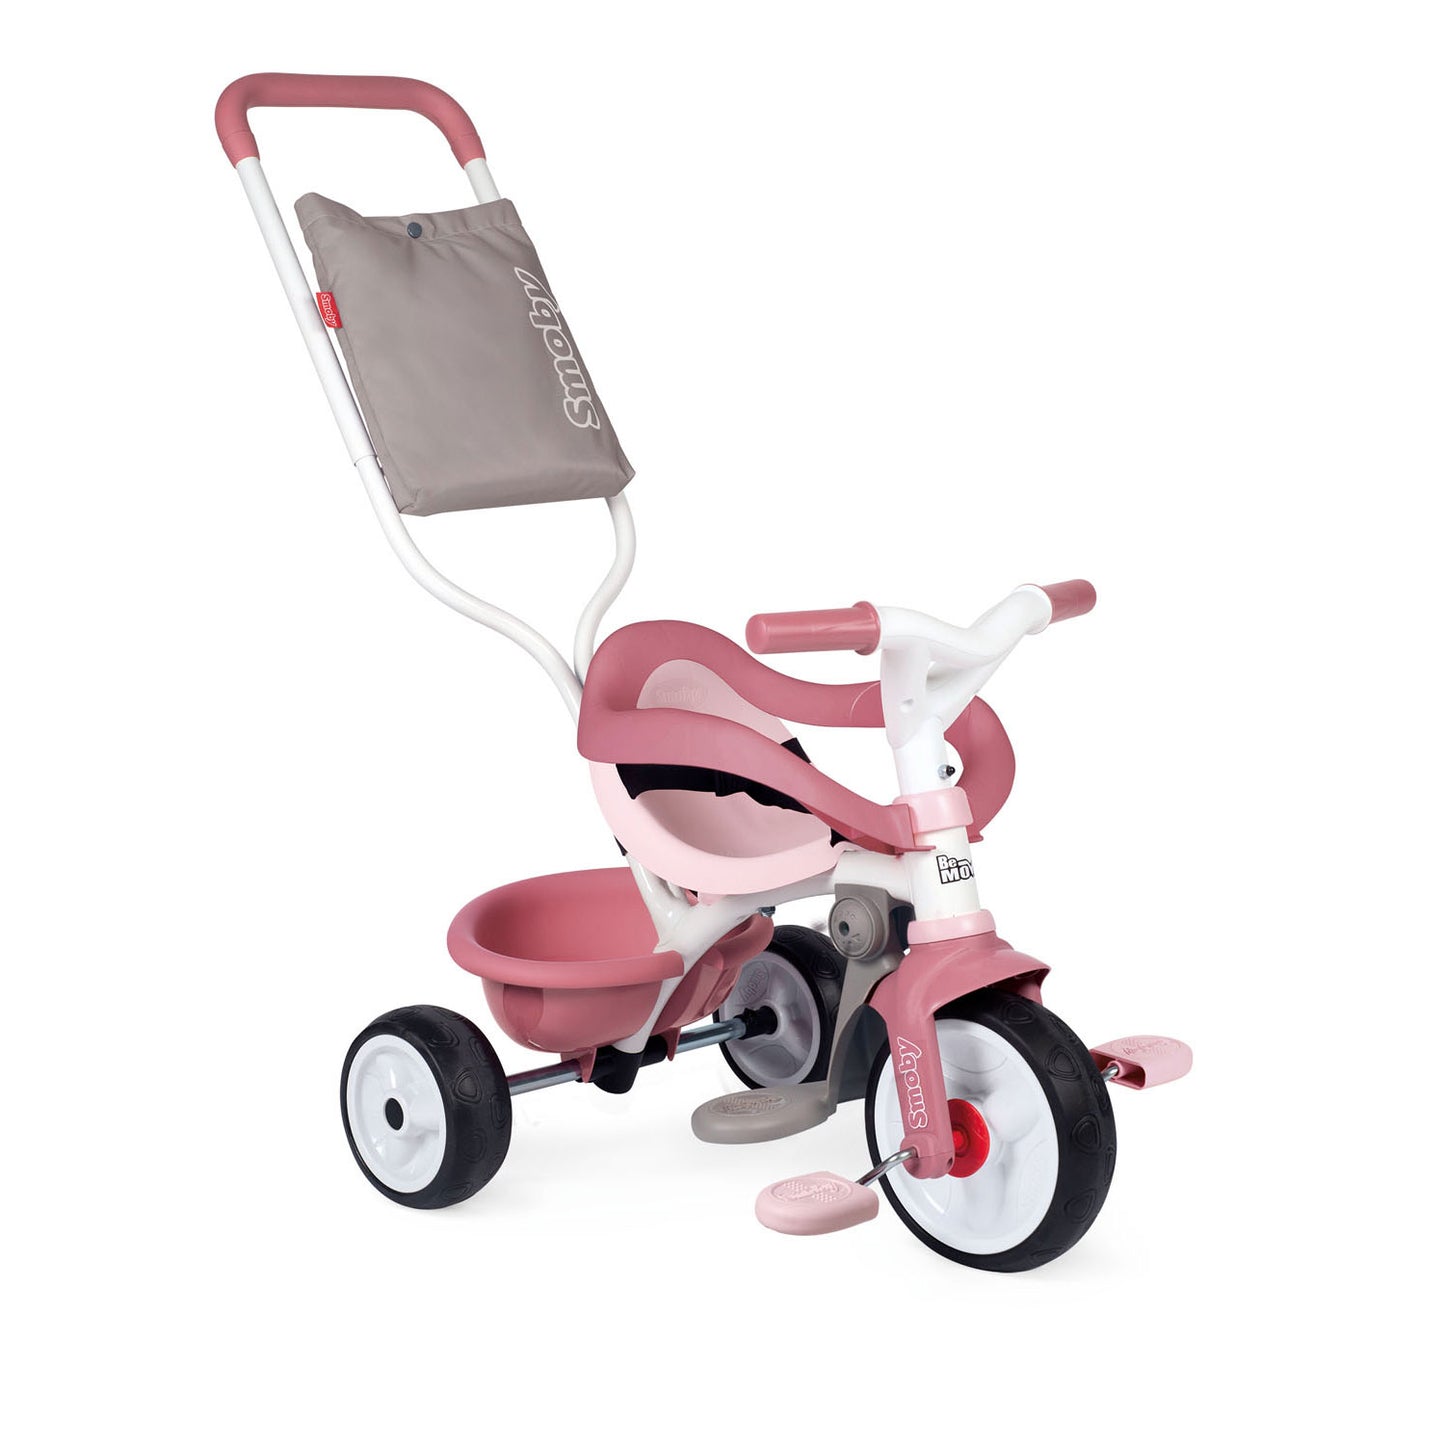 Smoby Be Comfort Driewieler Roze